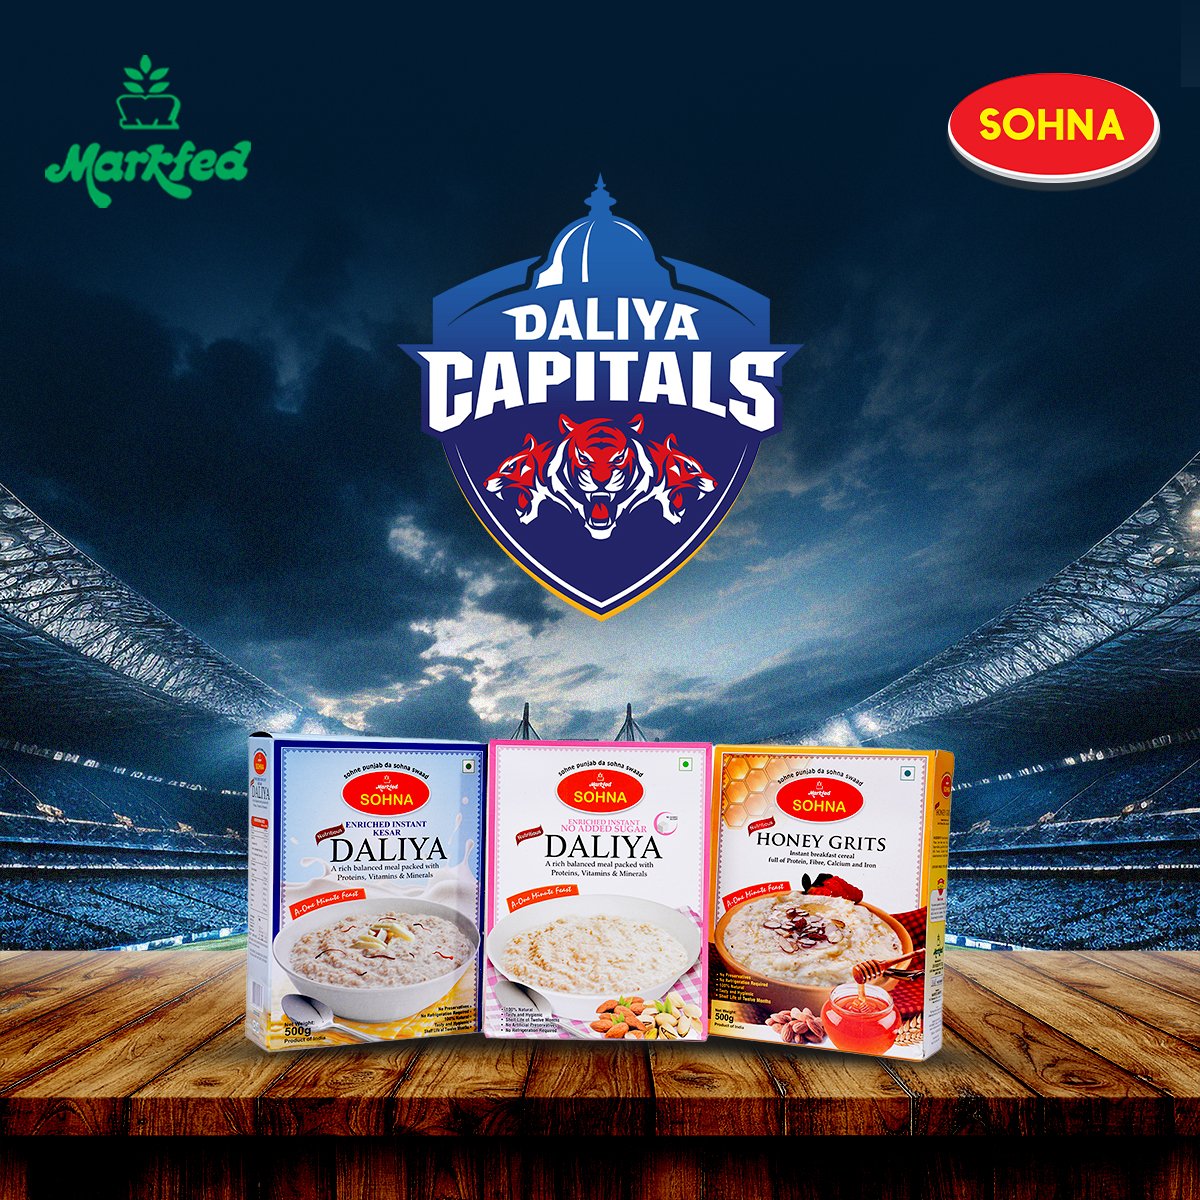 Fuel up your day with SOHNA Daliya, the perfect match to keep you energized like an IPL game! Stay satisfied, stay excited. 🤩 To purchase Markfed SOHNA Products, please check the link given: bit.ly/3IOvqoo #SOHNA #Punjab #Daliya #IPL #DelhiCapitals #MIvsDC